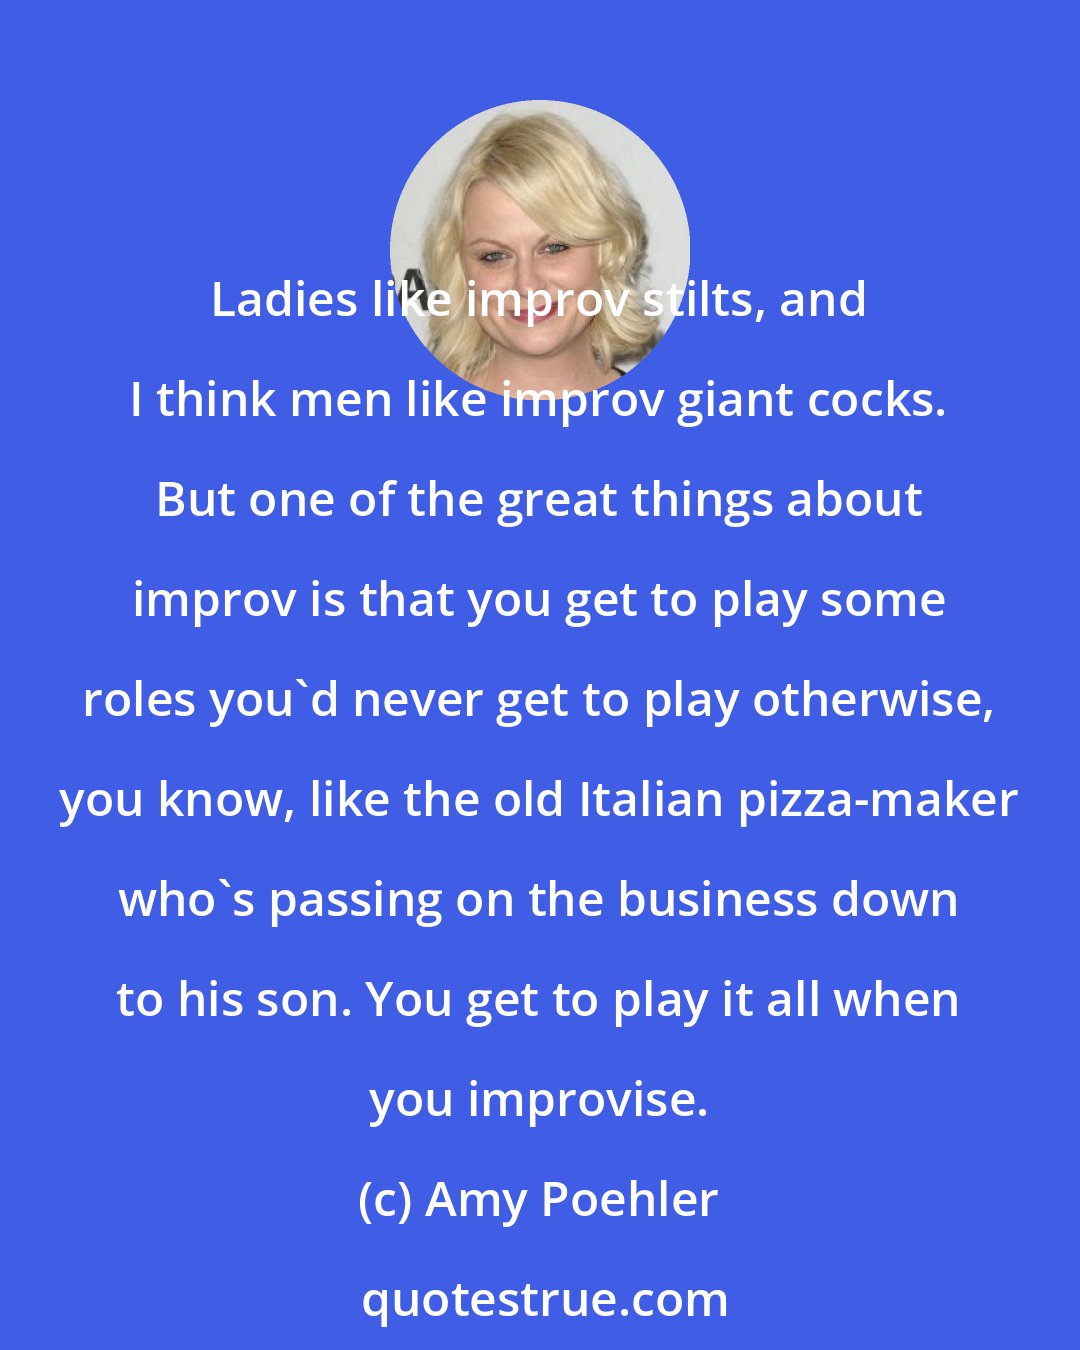 Amy Poehler: Ladies like improv stilts, and I think men like improv giant cocks. But one of the great things about improv is that you get to play some roles you'd never get to play otherwise, you know, like the old Italian pizza-maker who's passing on the business down to his son. You get to play it all when you improvise.